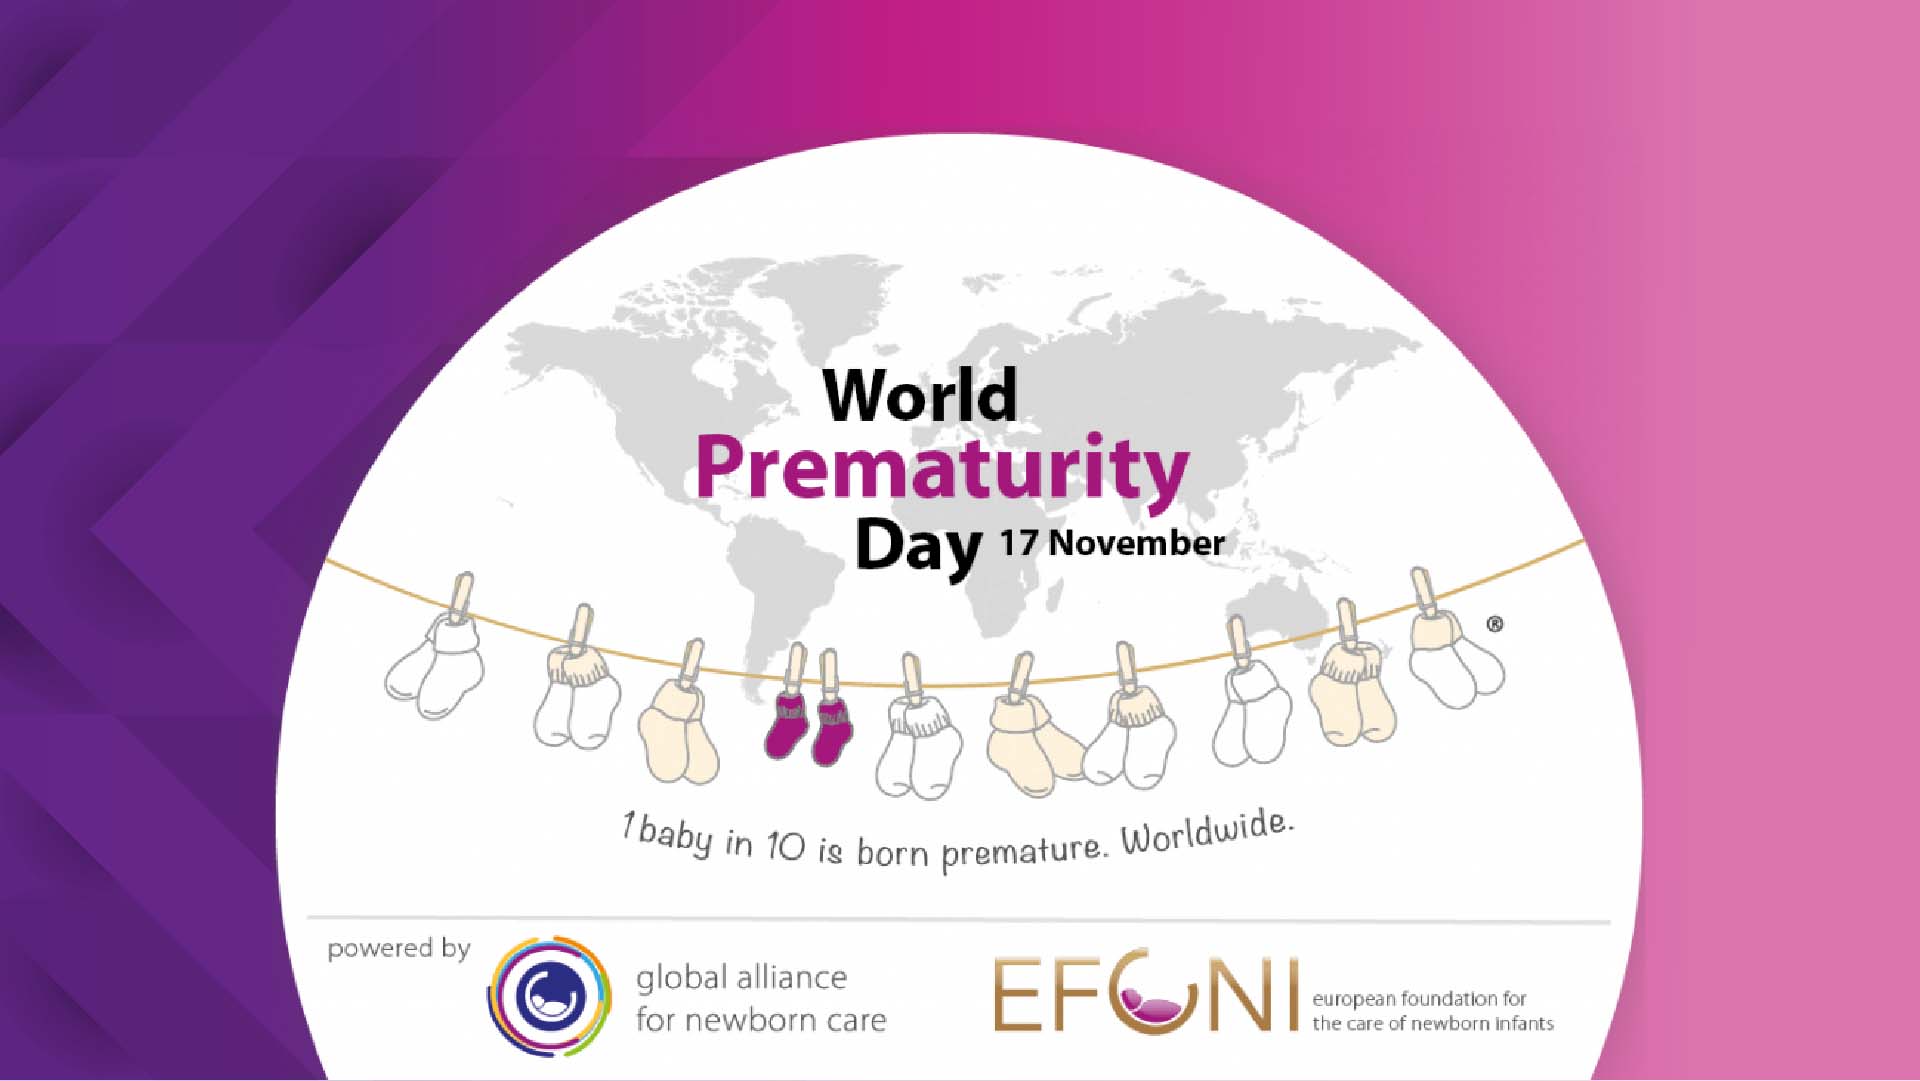 World prematurity day - Awareness about preterm labour, delivery, and birth